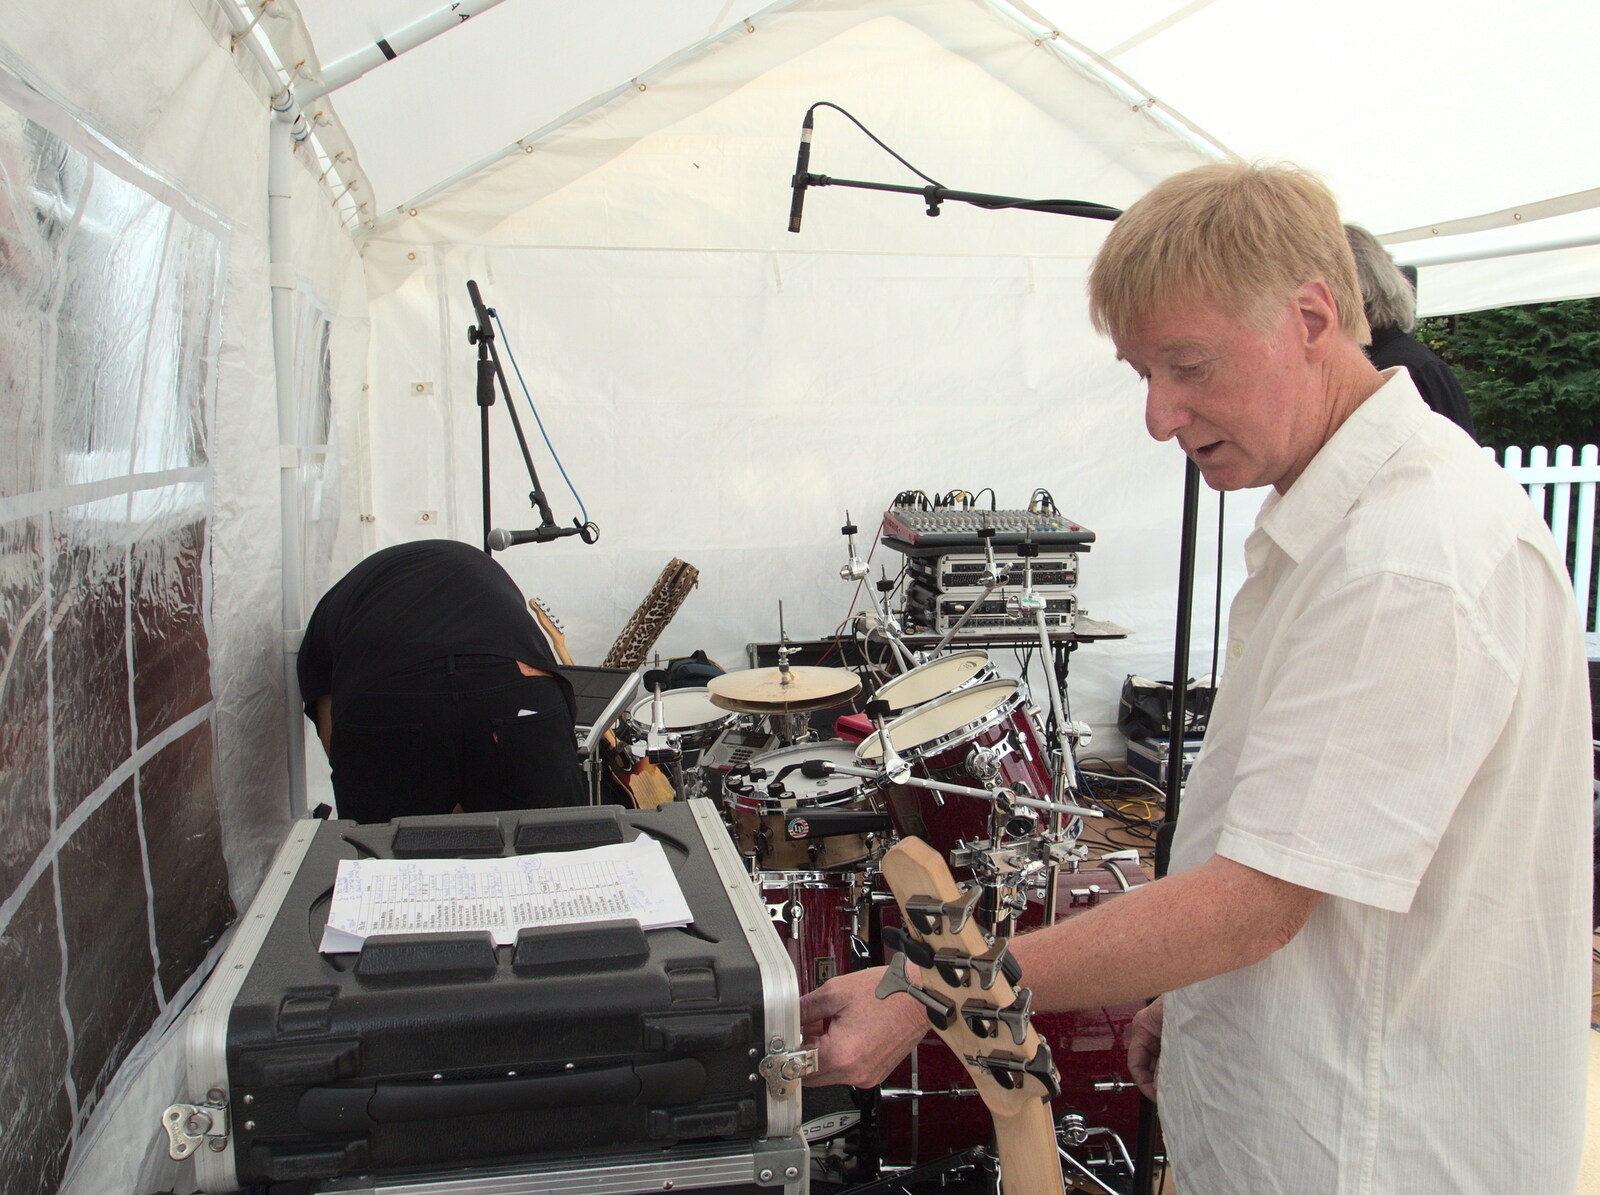 John the deputy bassist twiddles knobs from The BBs at Bacton, and Abbey Gardens, Bury St. Edmunds, Suffolk - 19th July 2015